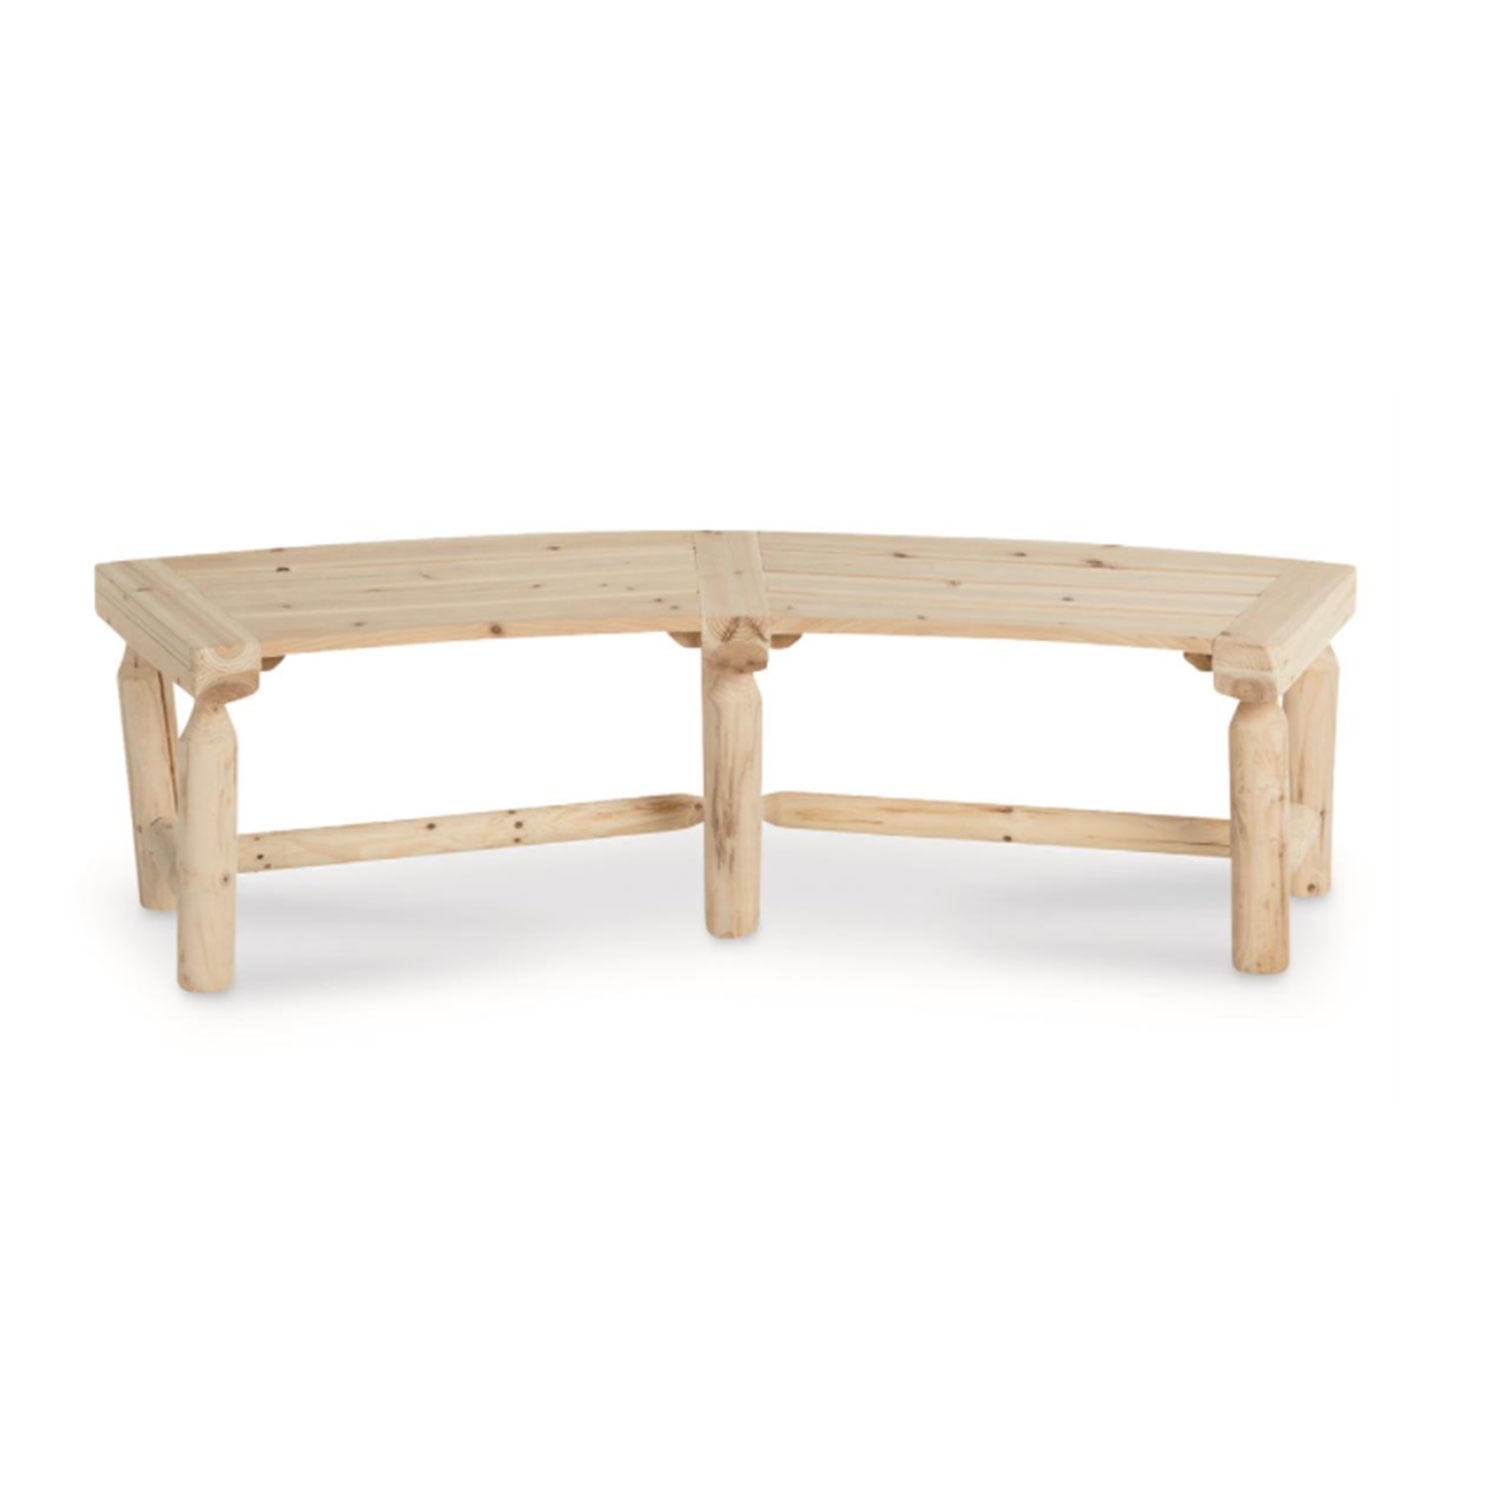 Wood Outdoor Patio Log Fire Pit Bench, Log Benches For Fire Pit